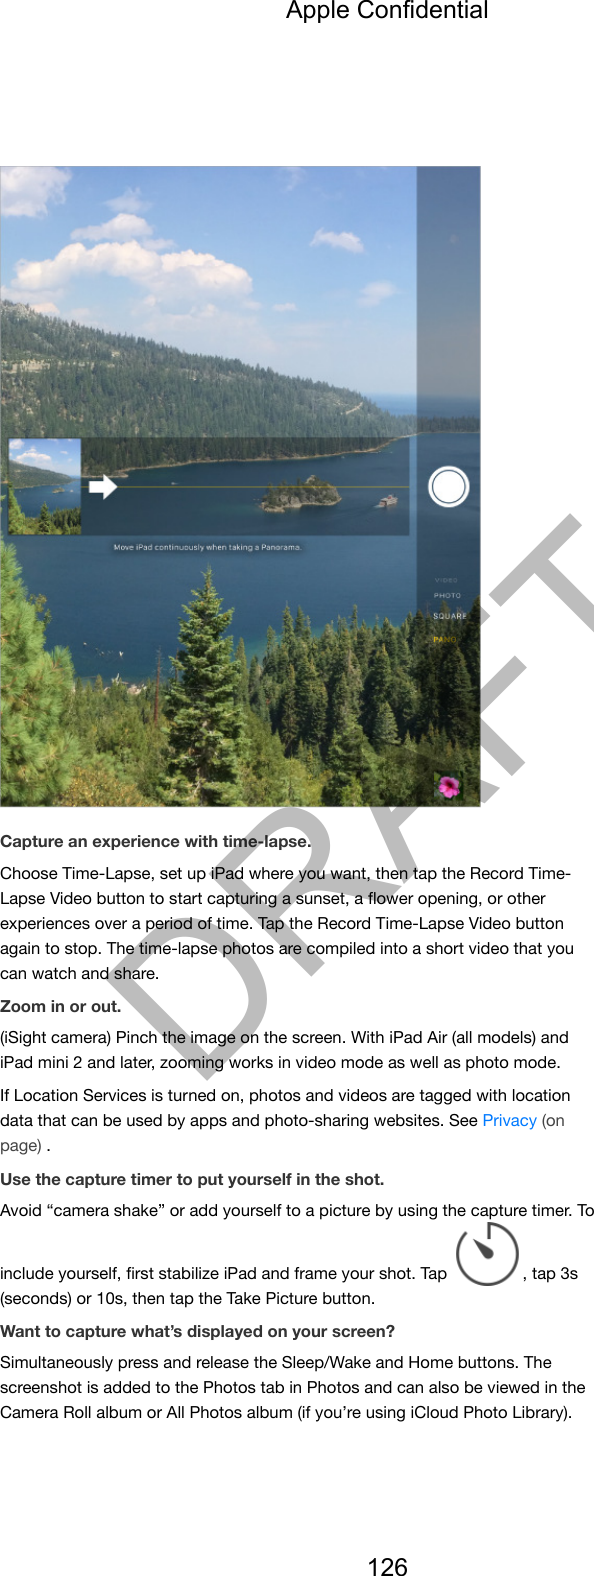 Capture an experience with time-lapse.Choose Time-Lapse, set up iPad where you want, then tap the Record Time-Lapse Video button to start capturing a sunset, a ﬂower opening, or otherexperiences over a period of time. Tap the Record Time-Lapse Video buttonagain to stop. The time-lapse photos are compiled into a short video that youcan watch and share.Zoom in or out.(iSight camera) Pinch the image on the screen. With iPad Air (all models) andiPad mini 2 and later, zooming works in video mode as well as photo mode.If Location Services is turned on, photos and videos are tagged with locationdata that can be used by apps and photo-sharing websites. See Privacy (onpage) .Use the capture timer to put yourself in the shot.Avoid “camera shake” or add yourself to a picture by using the capture timer. Toinclude yourself, ﬁrst stabilize iPad and frame your shot. Tap  , tap 3s(seconds) or 10s, then tap the Take Picture button.Want to capture what’s displayed on your screen?Simultaneously press and release the Sleep/Wake and Home buttons. Thescreenshot is added to the Photos tab in Photos and can also be viewed in theCamera Roll album or All Photos album (if you’re using iCloud Photo Library).Apple Confidential126DRAFT